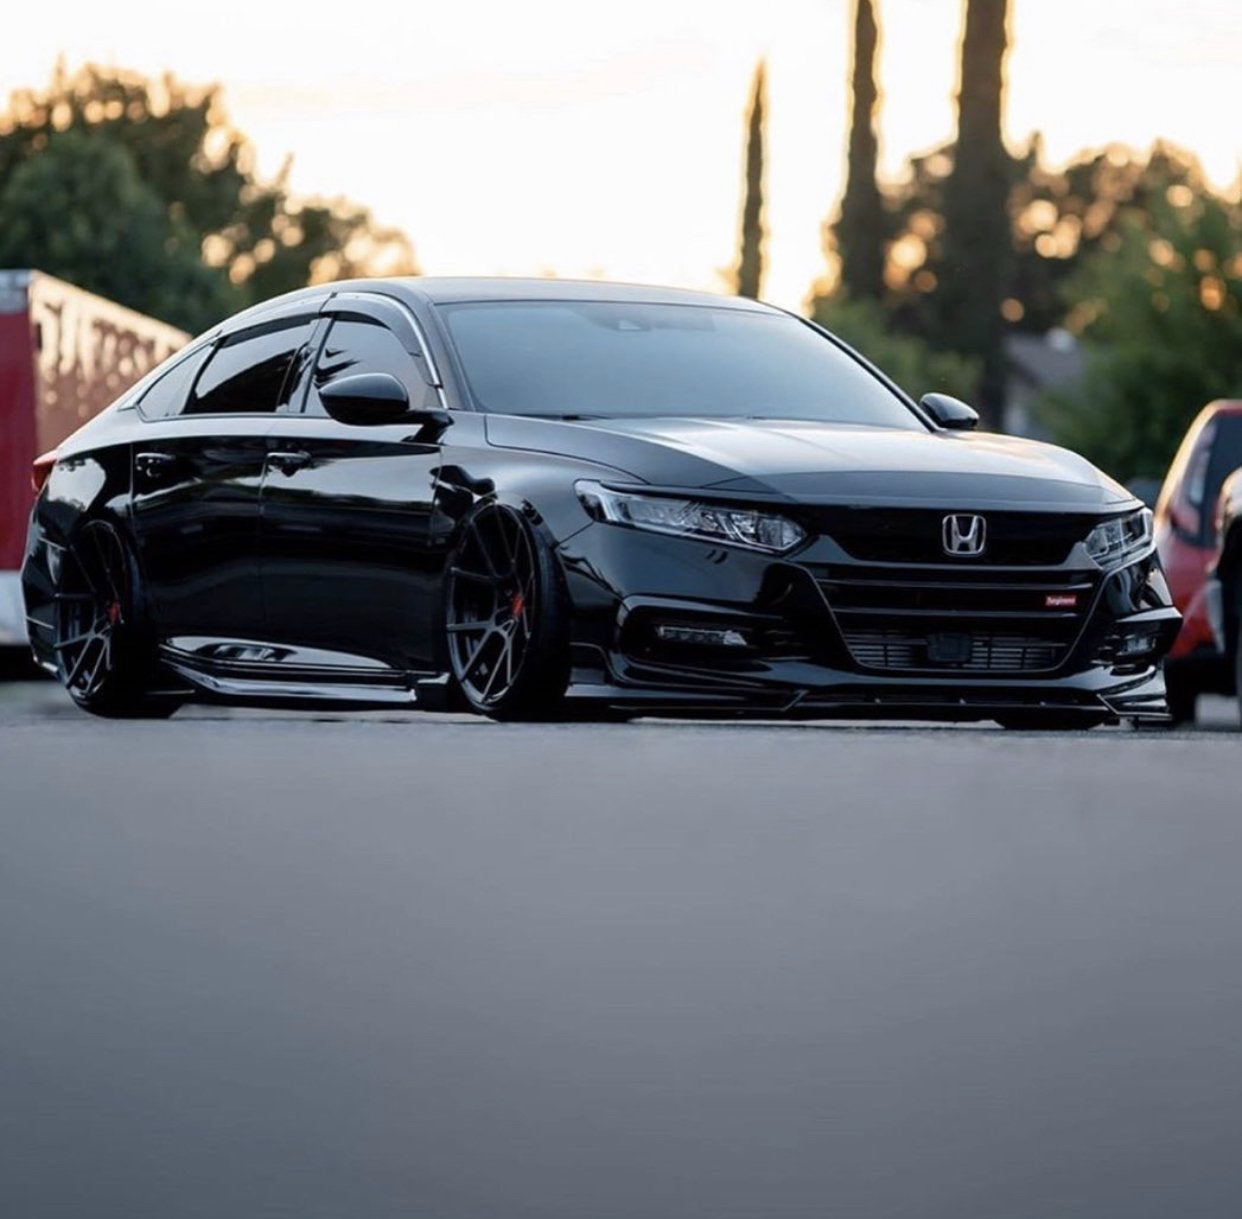 Post your favorite builds for inspiration! | 2018 Honda Accord Forum